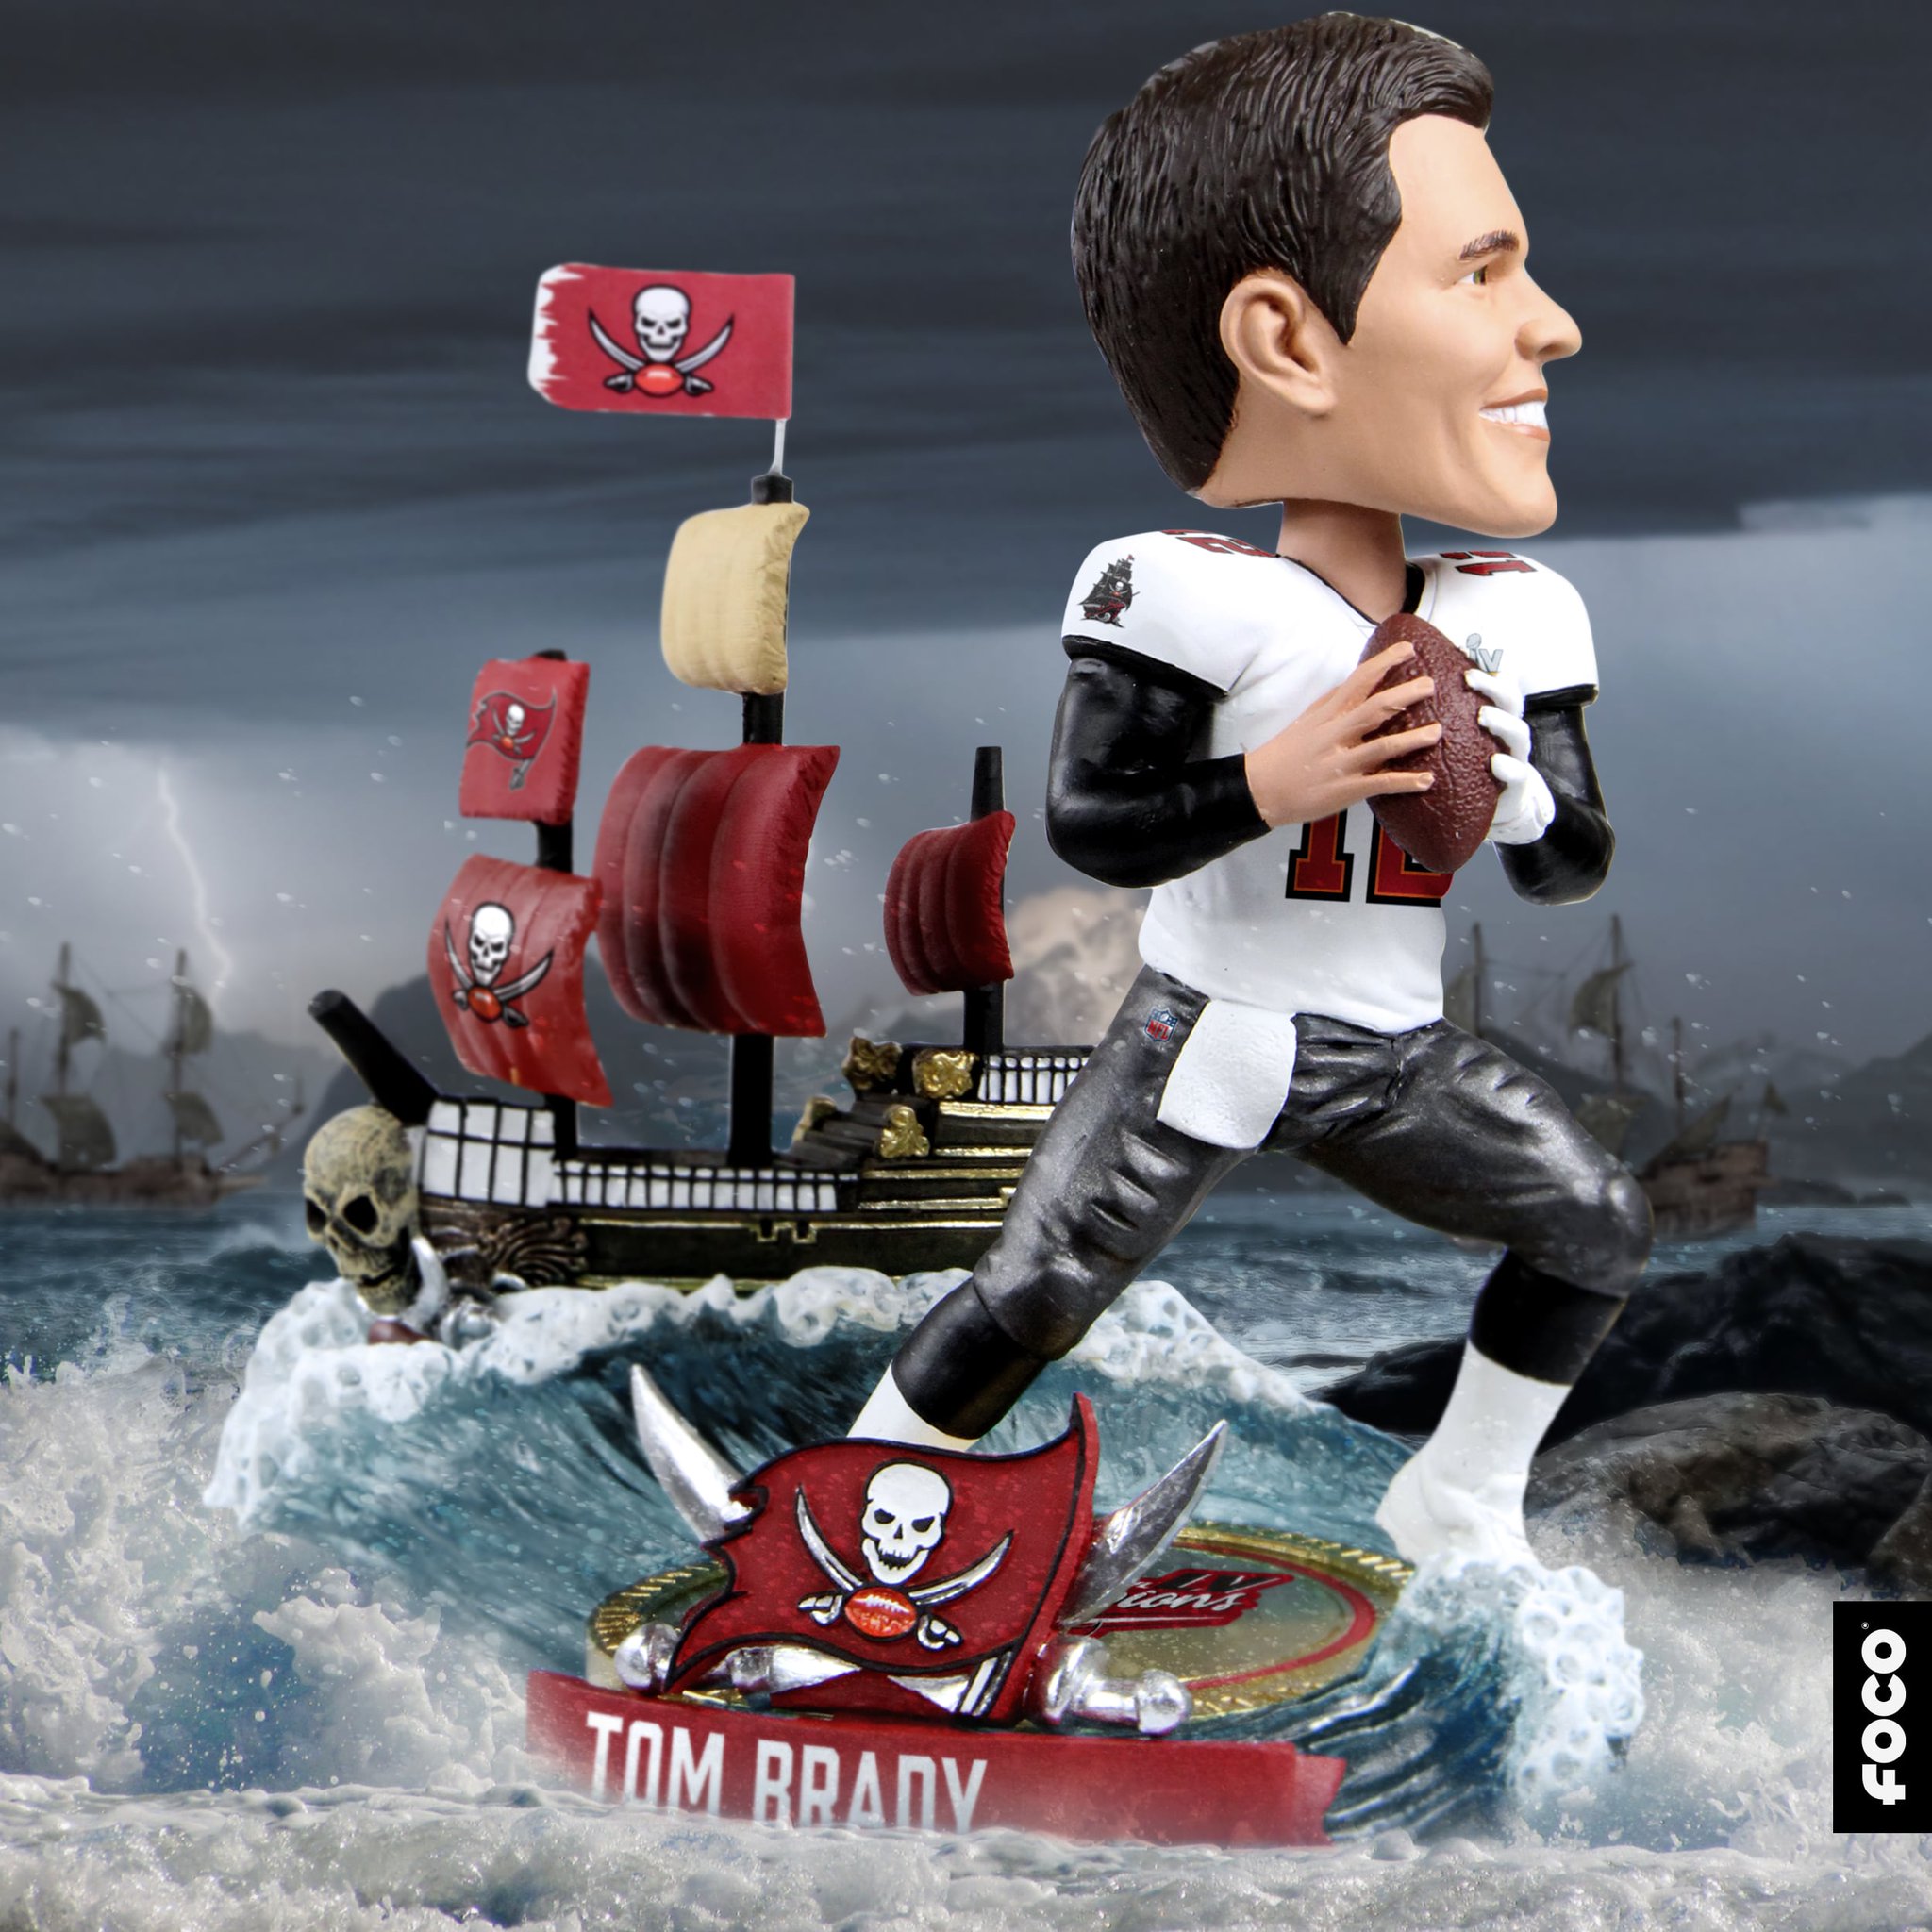 FOCO.com just dropped this Tom Brady bobblehead and more! Get yours by clicking the picture above!